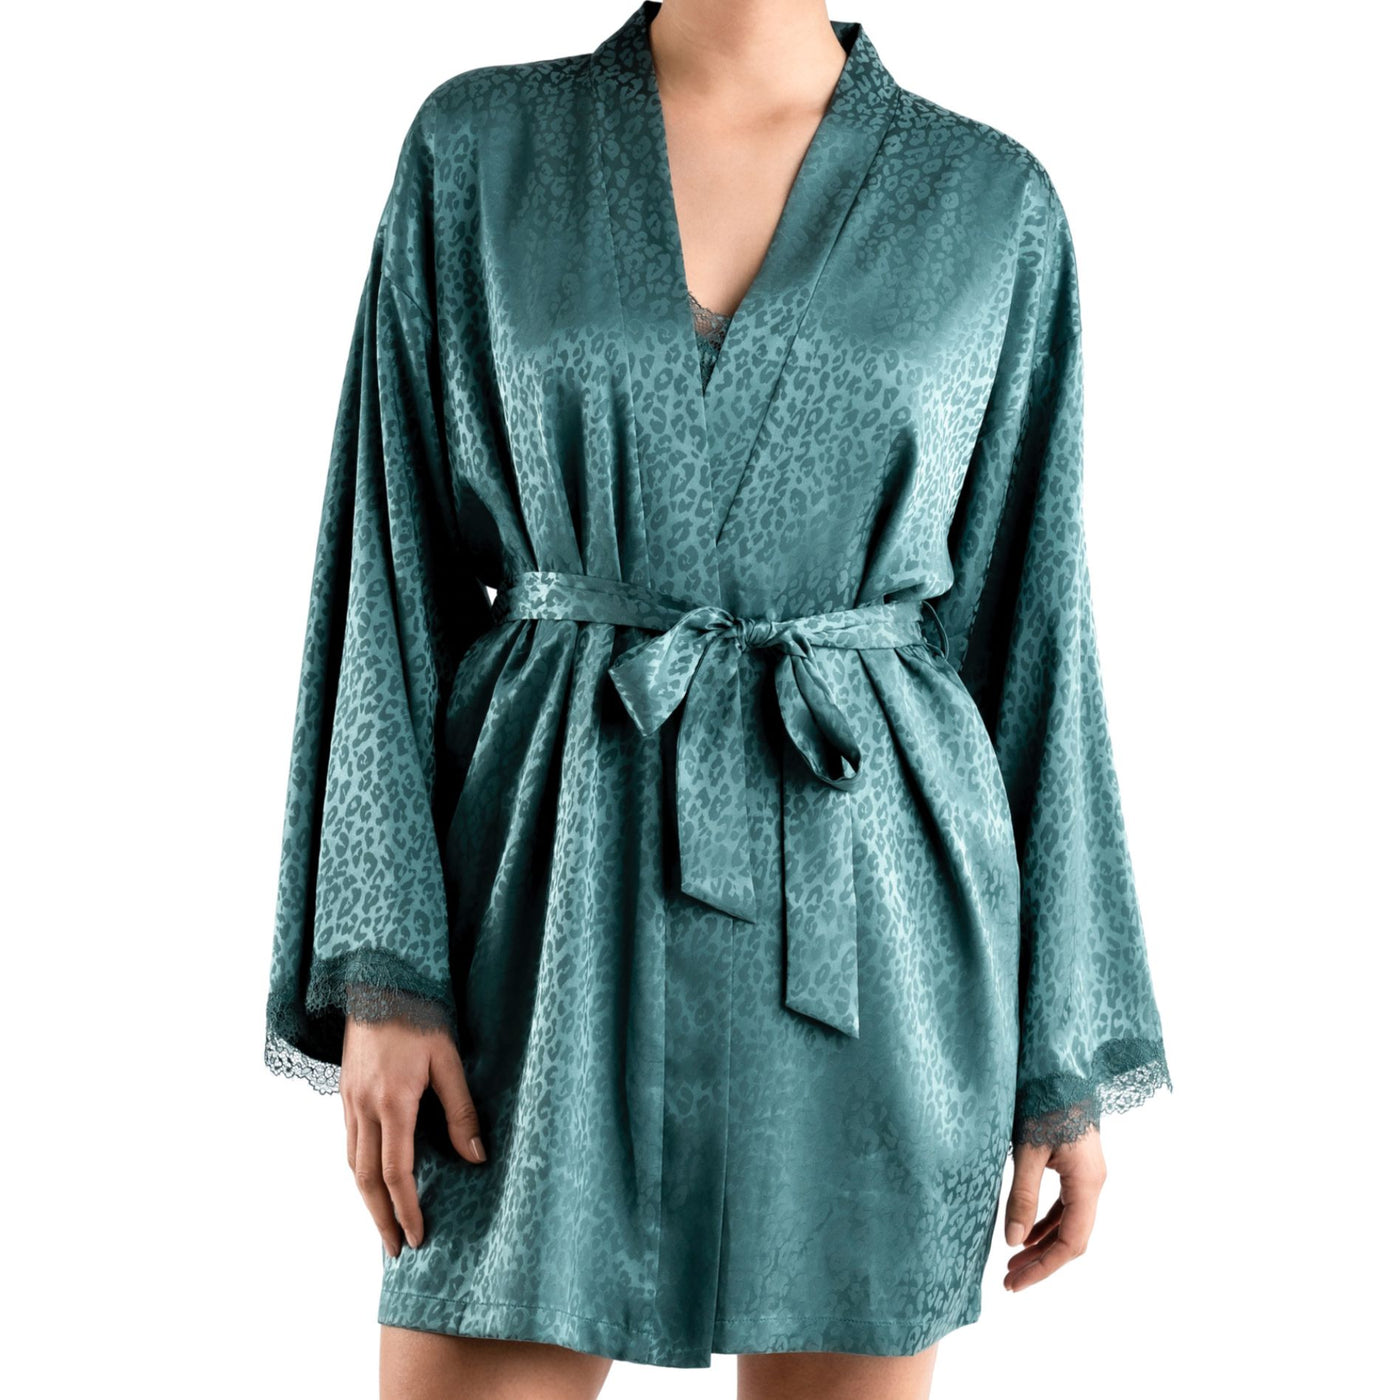 Jonquil Beatrice Wrap in Silver Pine BCT030-Robes-Jonquil in Bloom-Silver Pine-XSmall/Small-Anna Bella Fine Lingerie, Reveal Your Most Gorgeous Self!